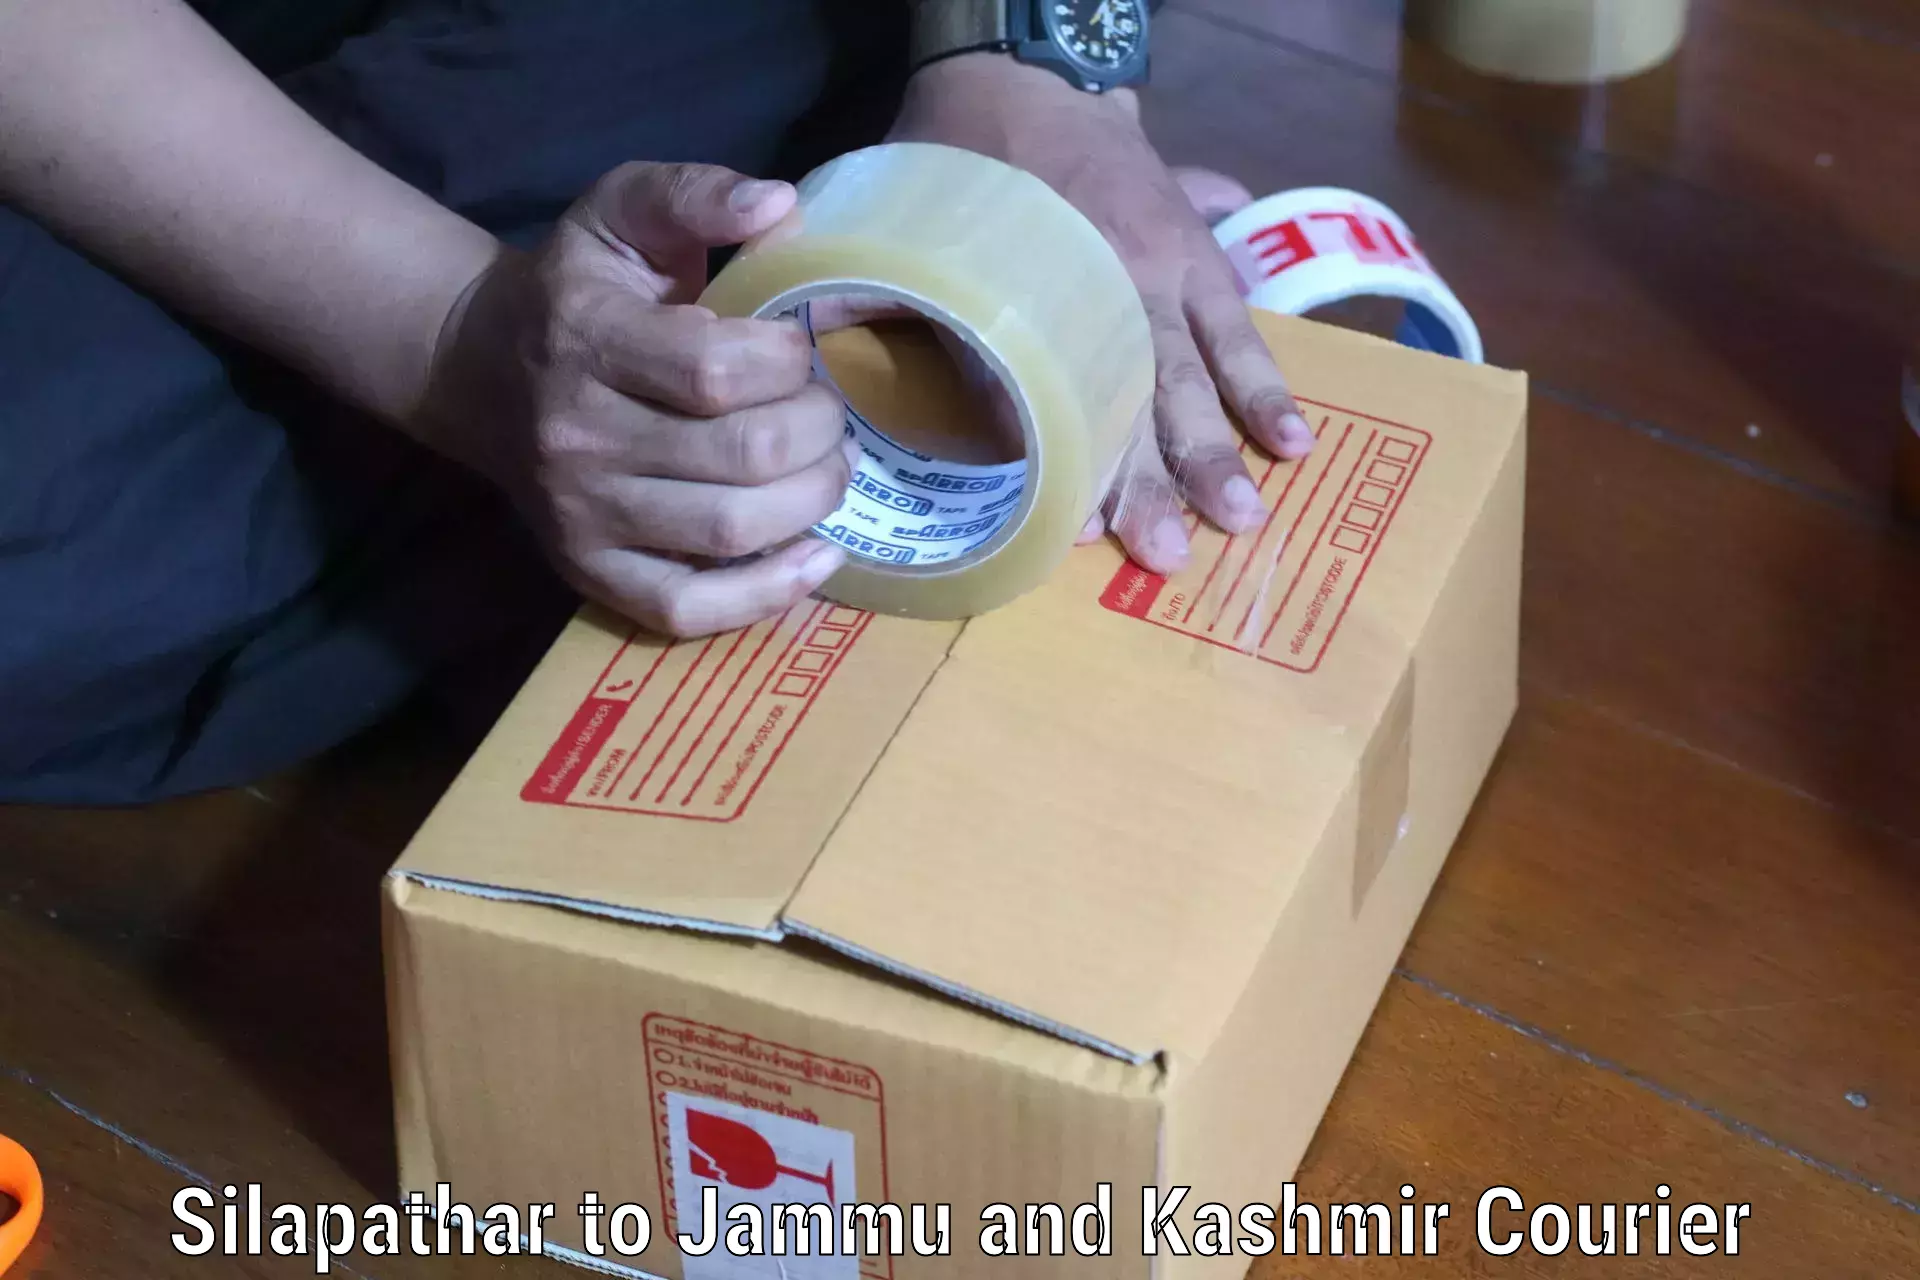 Courier service partnerships Silapathar to Leh